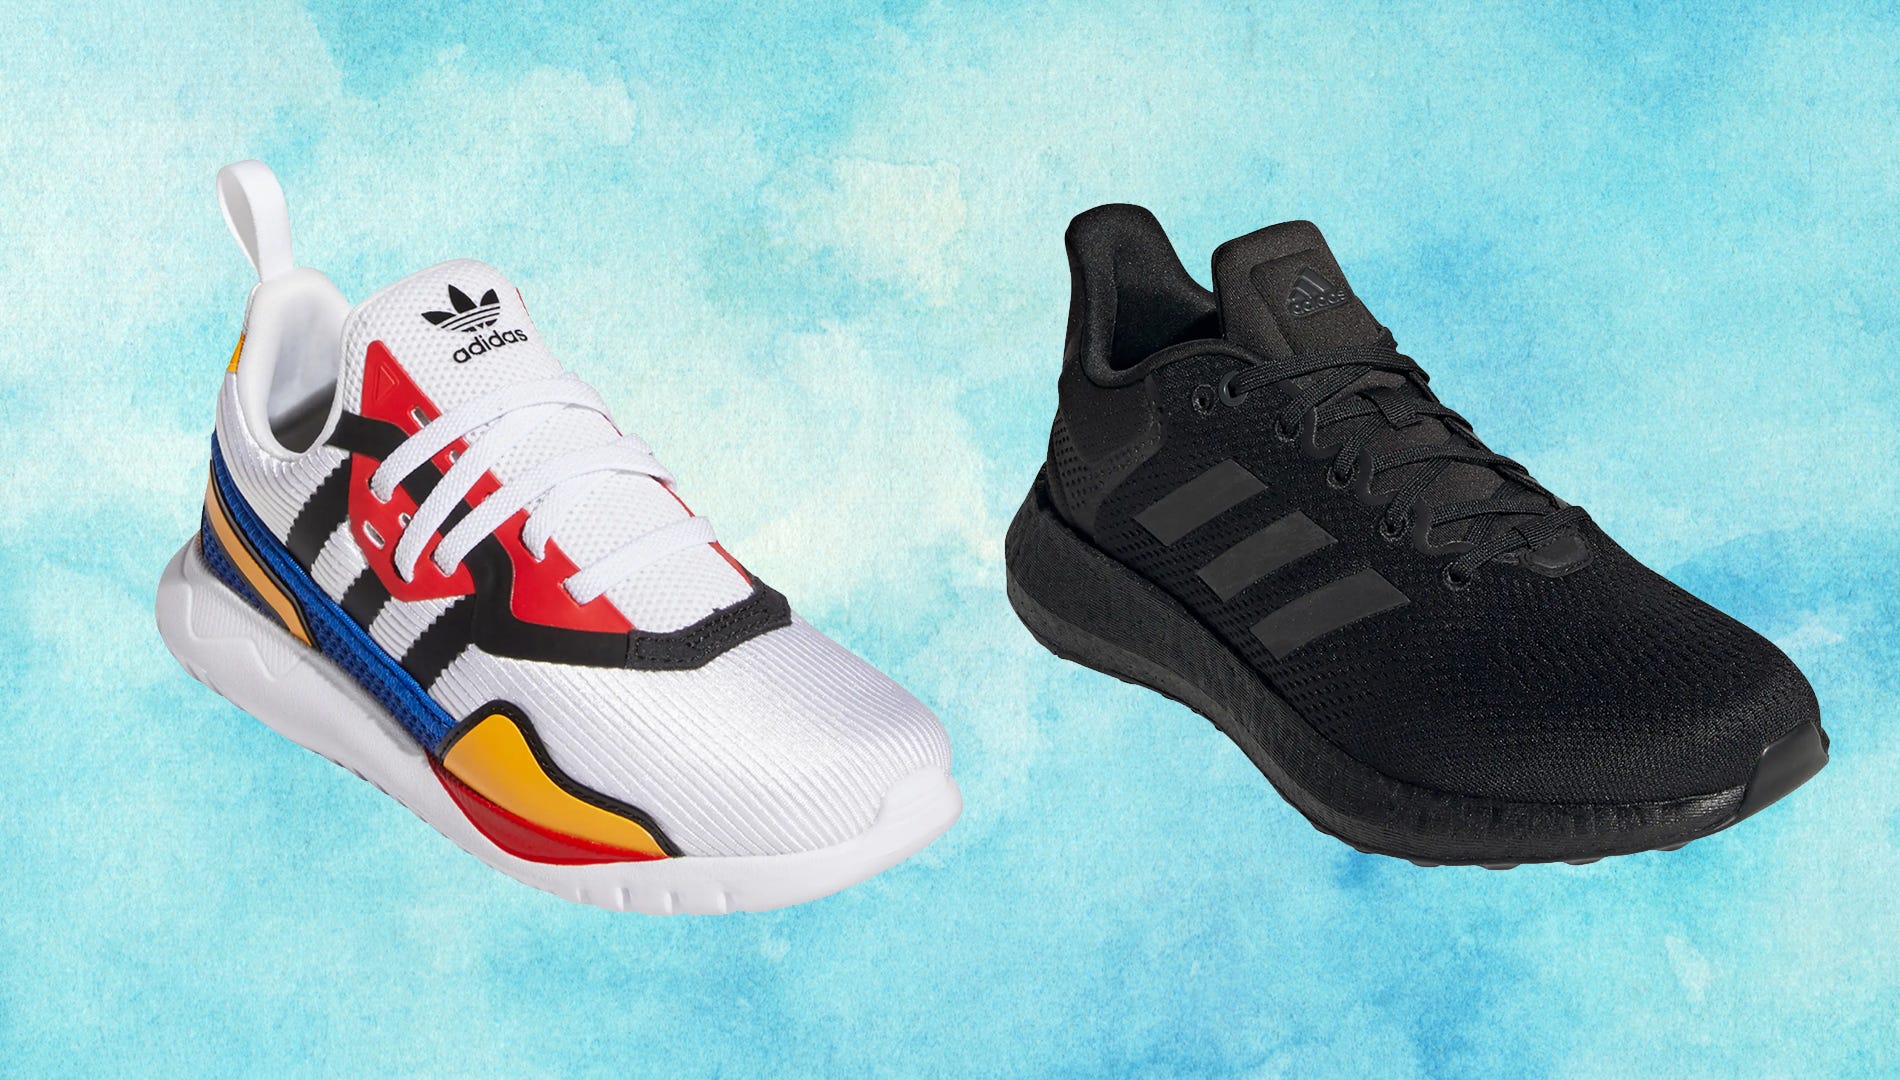 Nordstrom Anniversary Sale 2021: Get heavily discounted Adidas shoes now